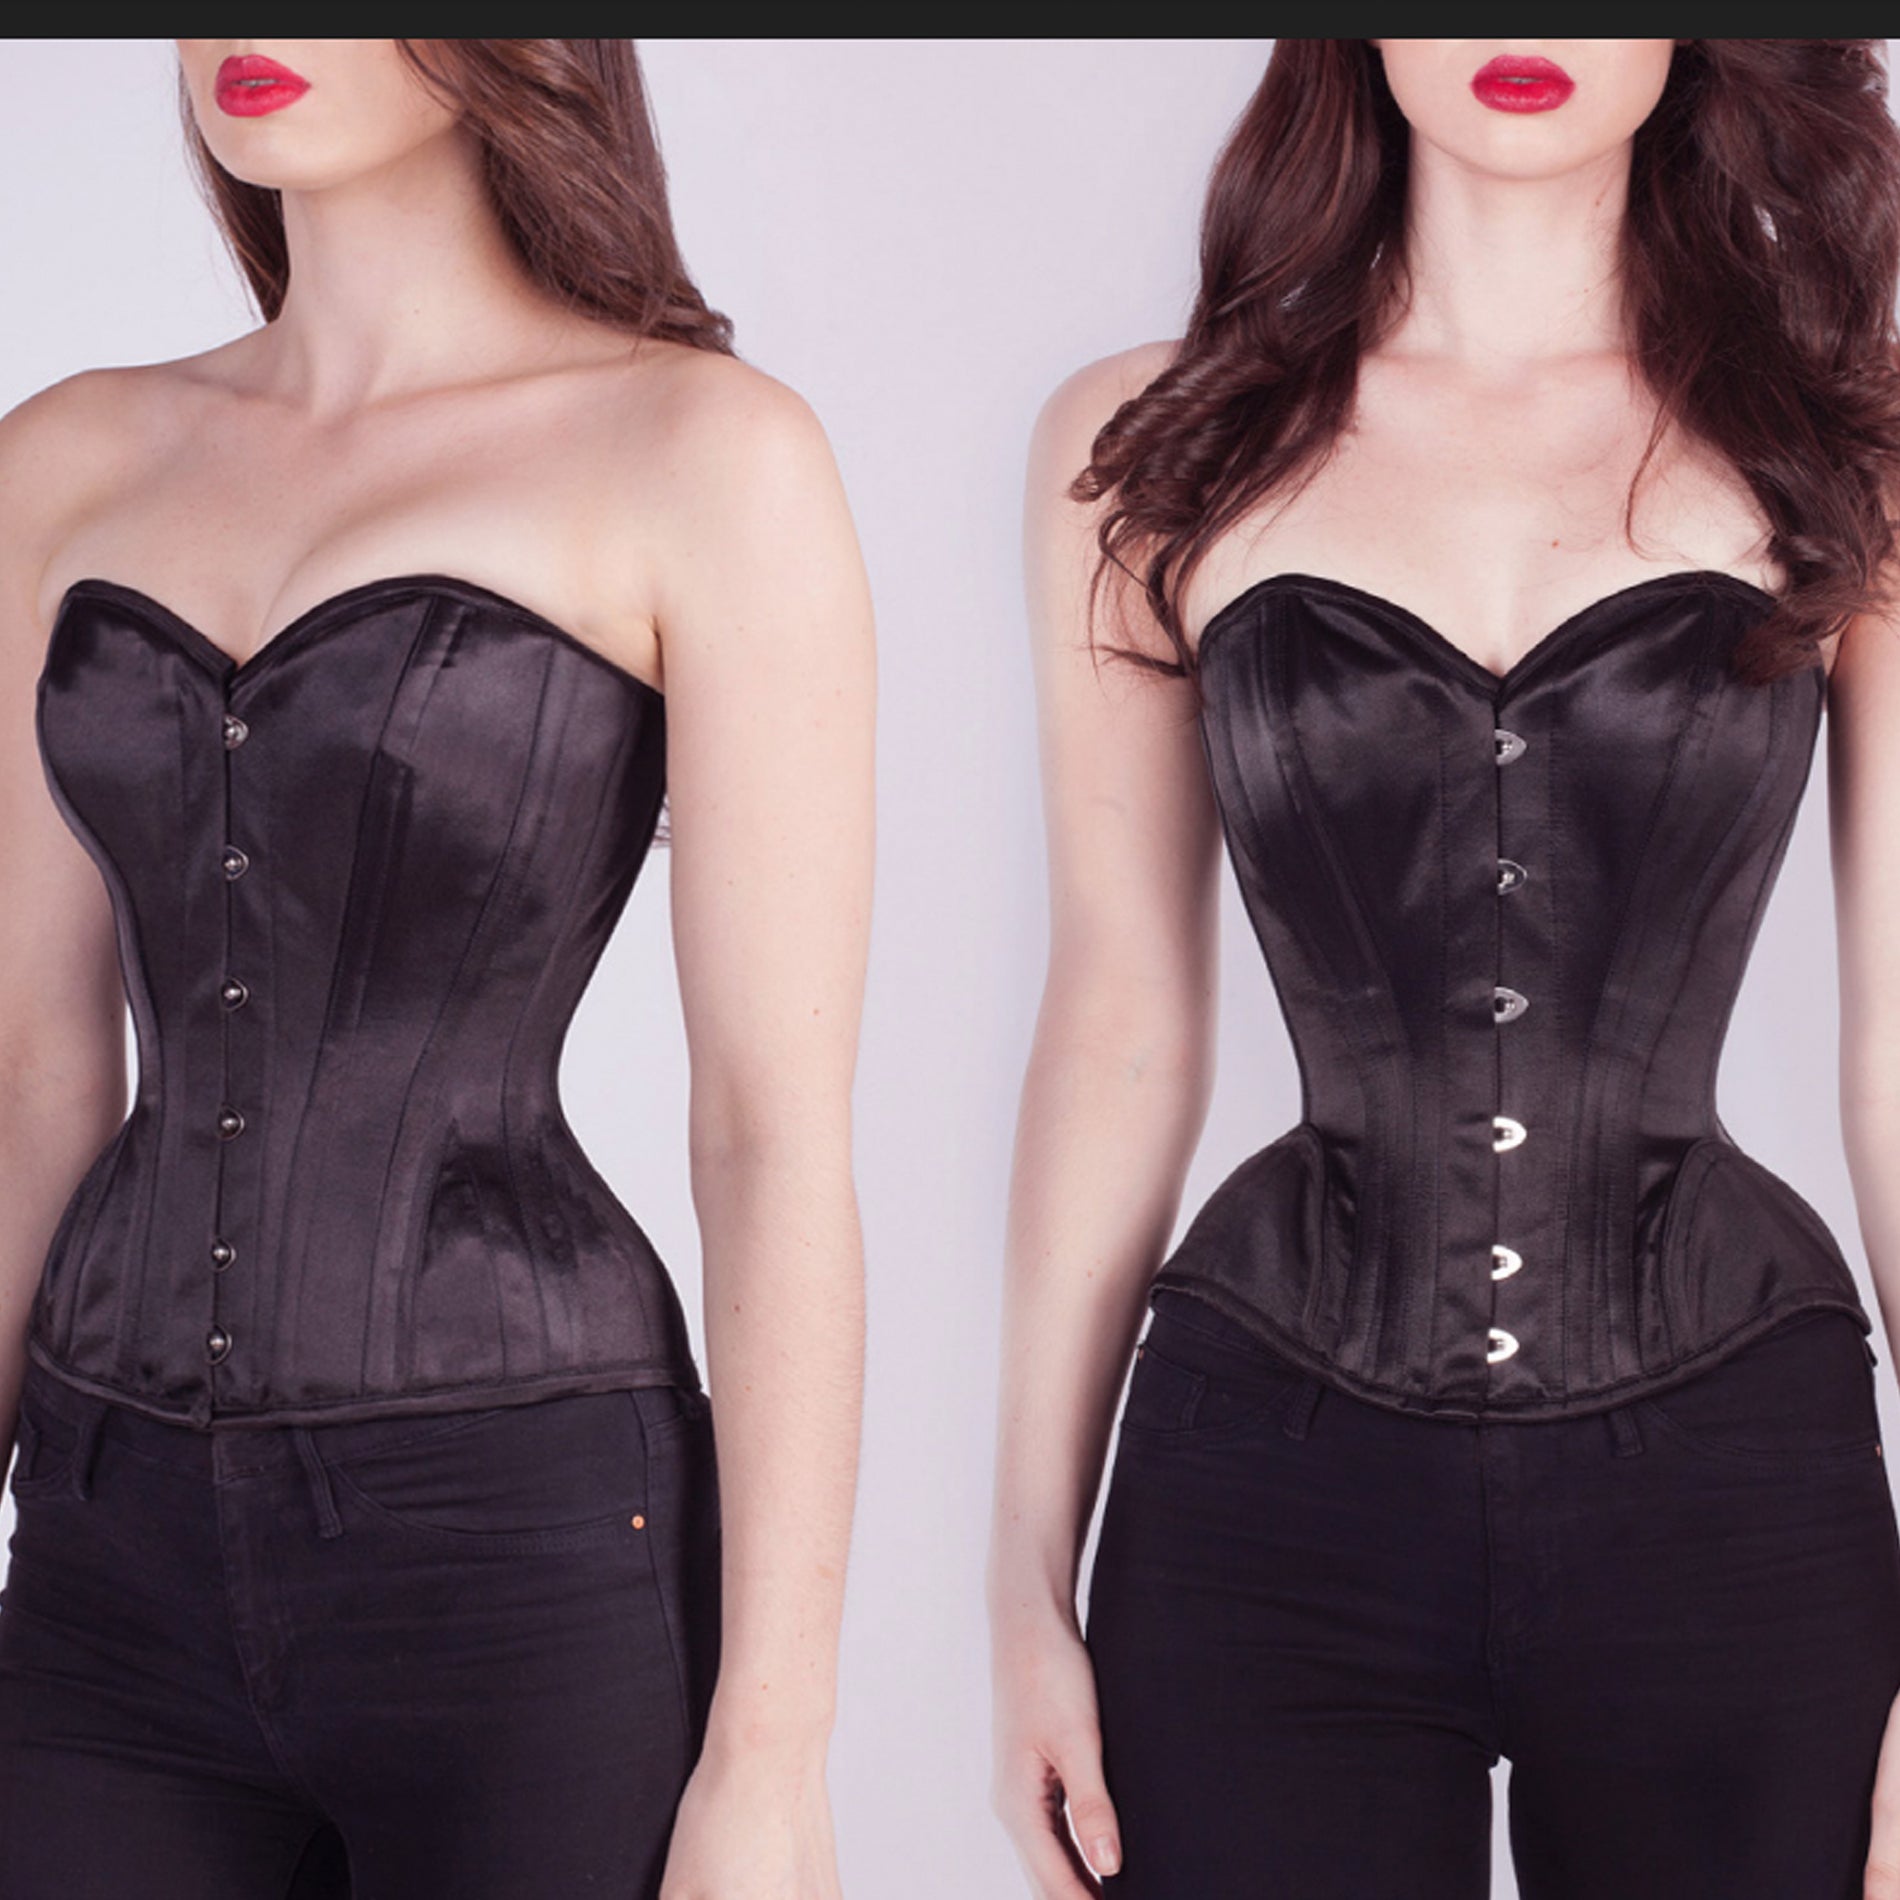 Is Wearing A Corset Bad For You Corset Story Nl